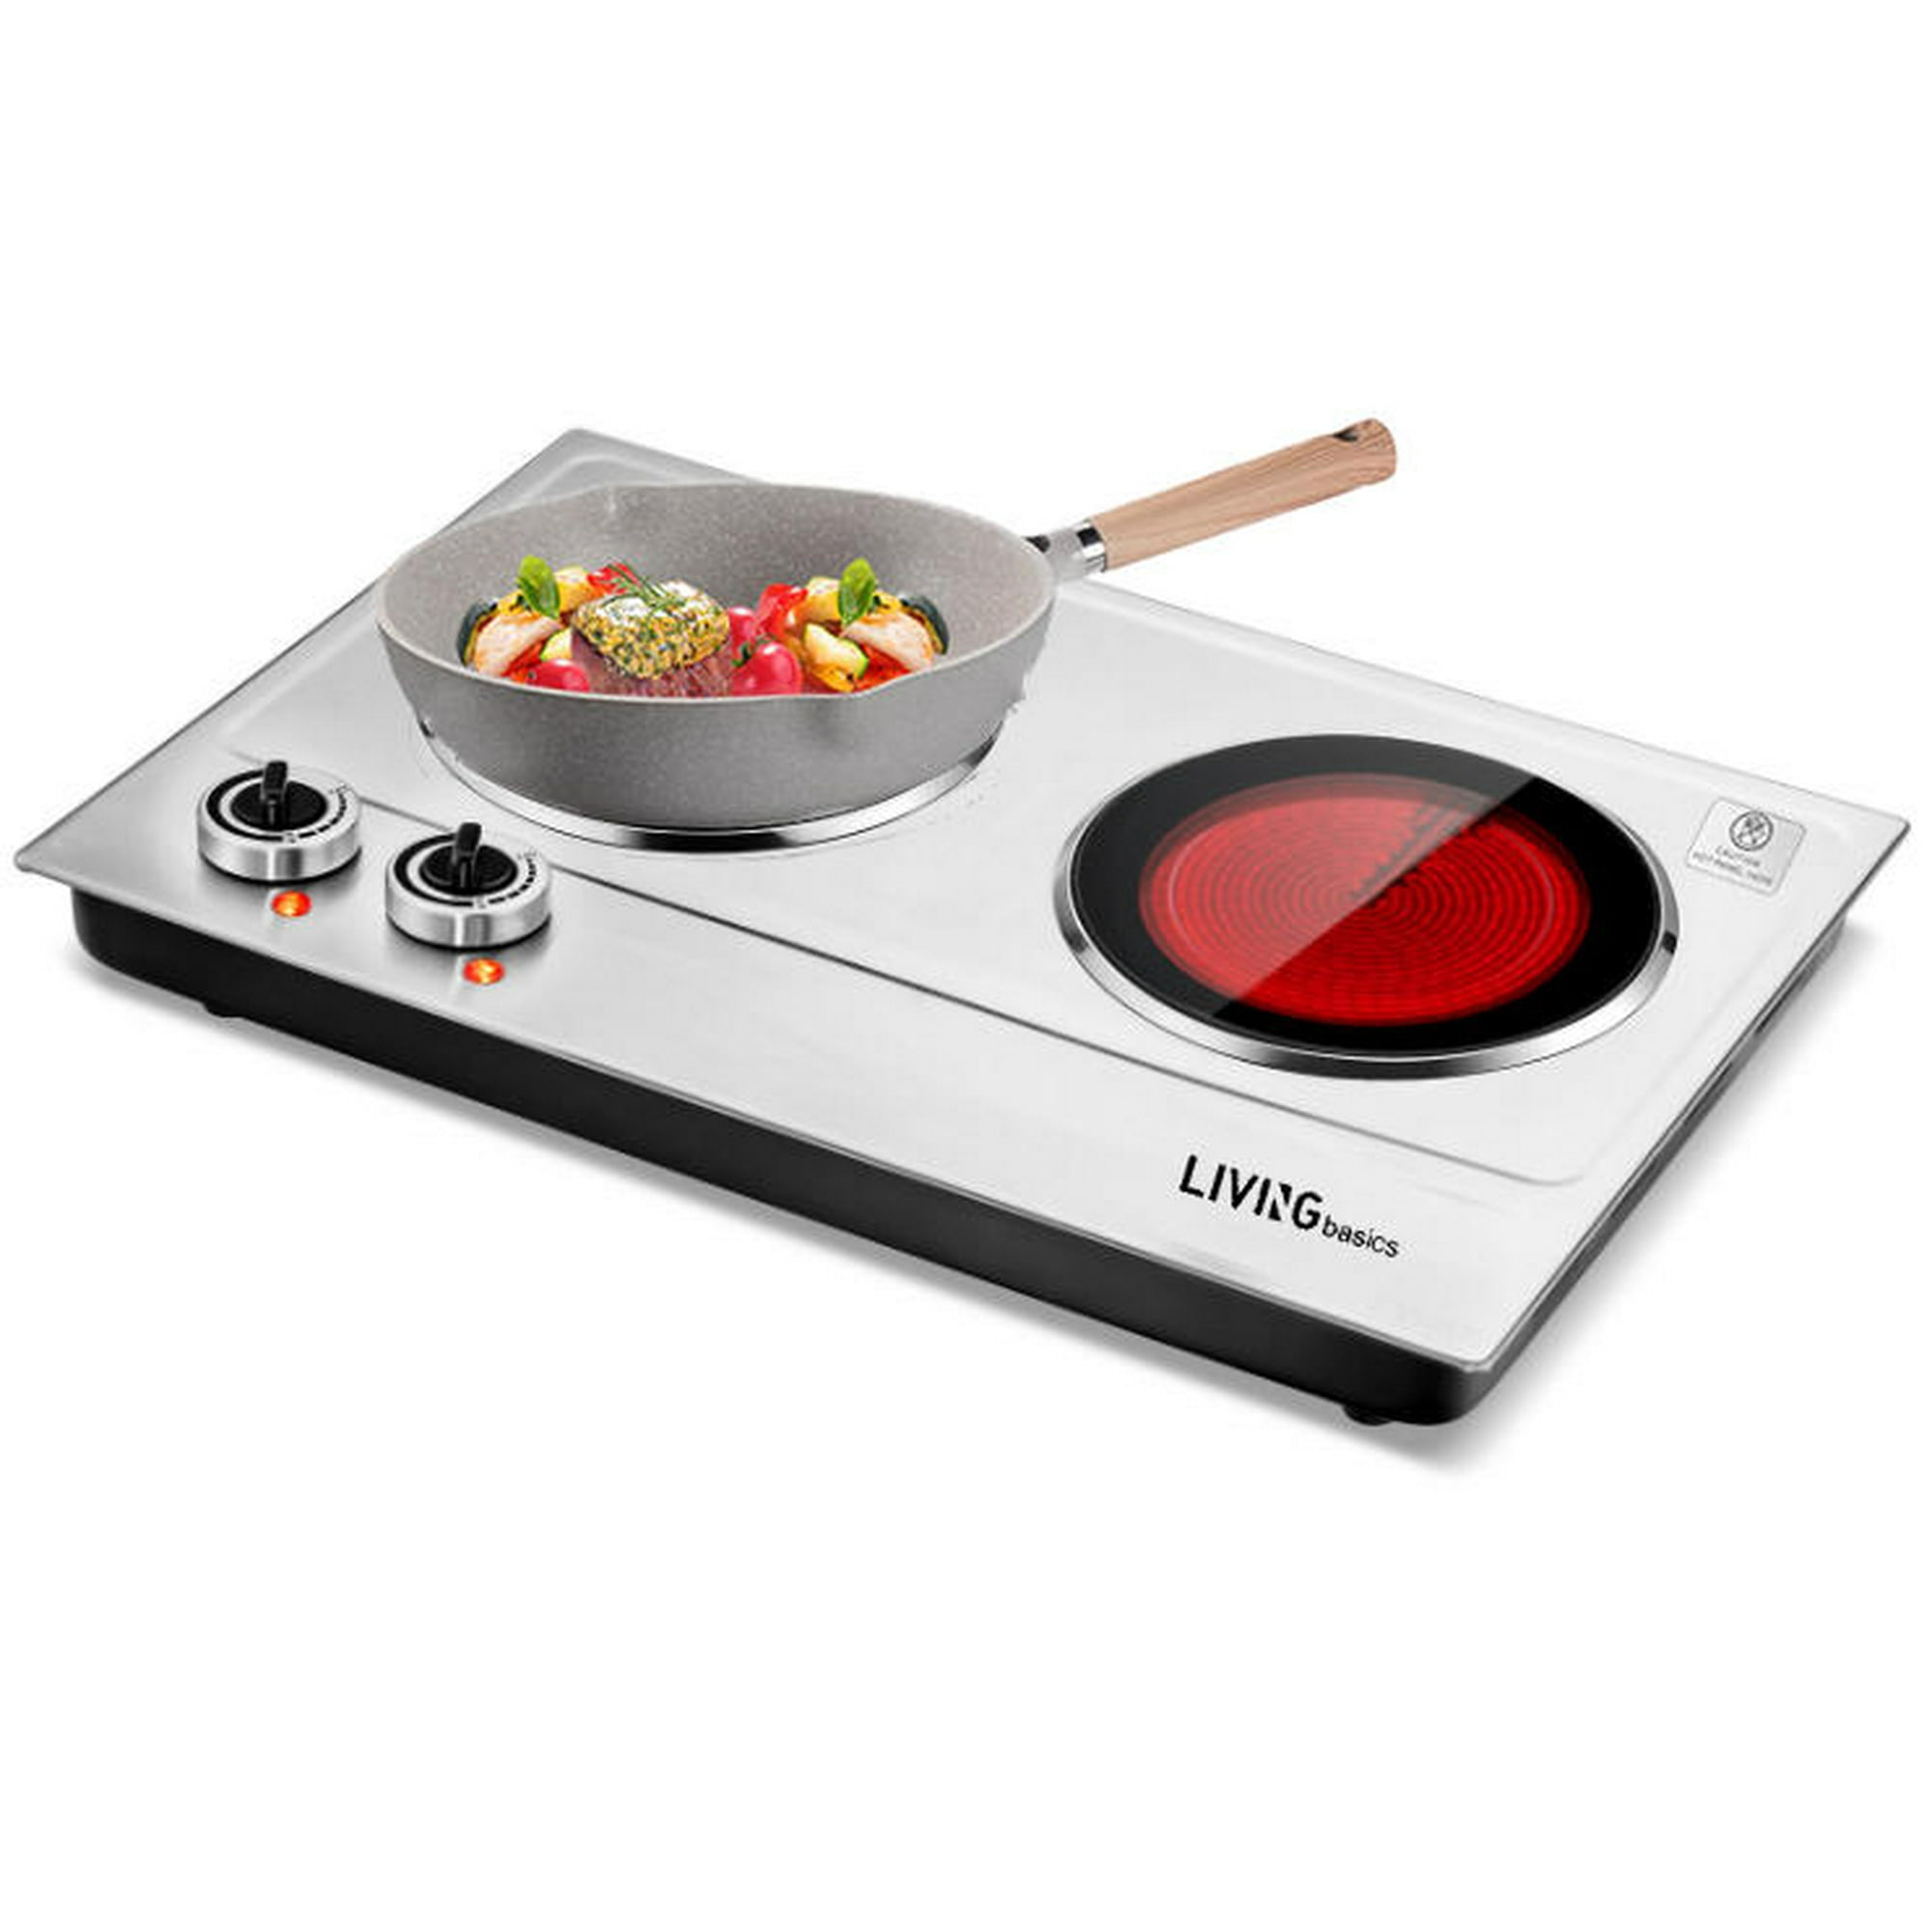 Lender Dollar equator 1800W Ceramic Electric Countertop Burner, Dual Infrared Hot Plates Cooker  W/Adjustable Temperature Control & Non-Slip Rubber Feet Stainless Steel  Cooktop | Walmart Canada